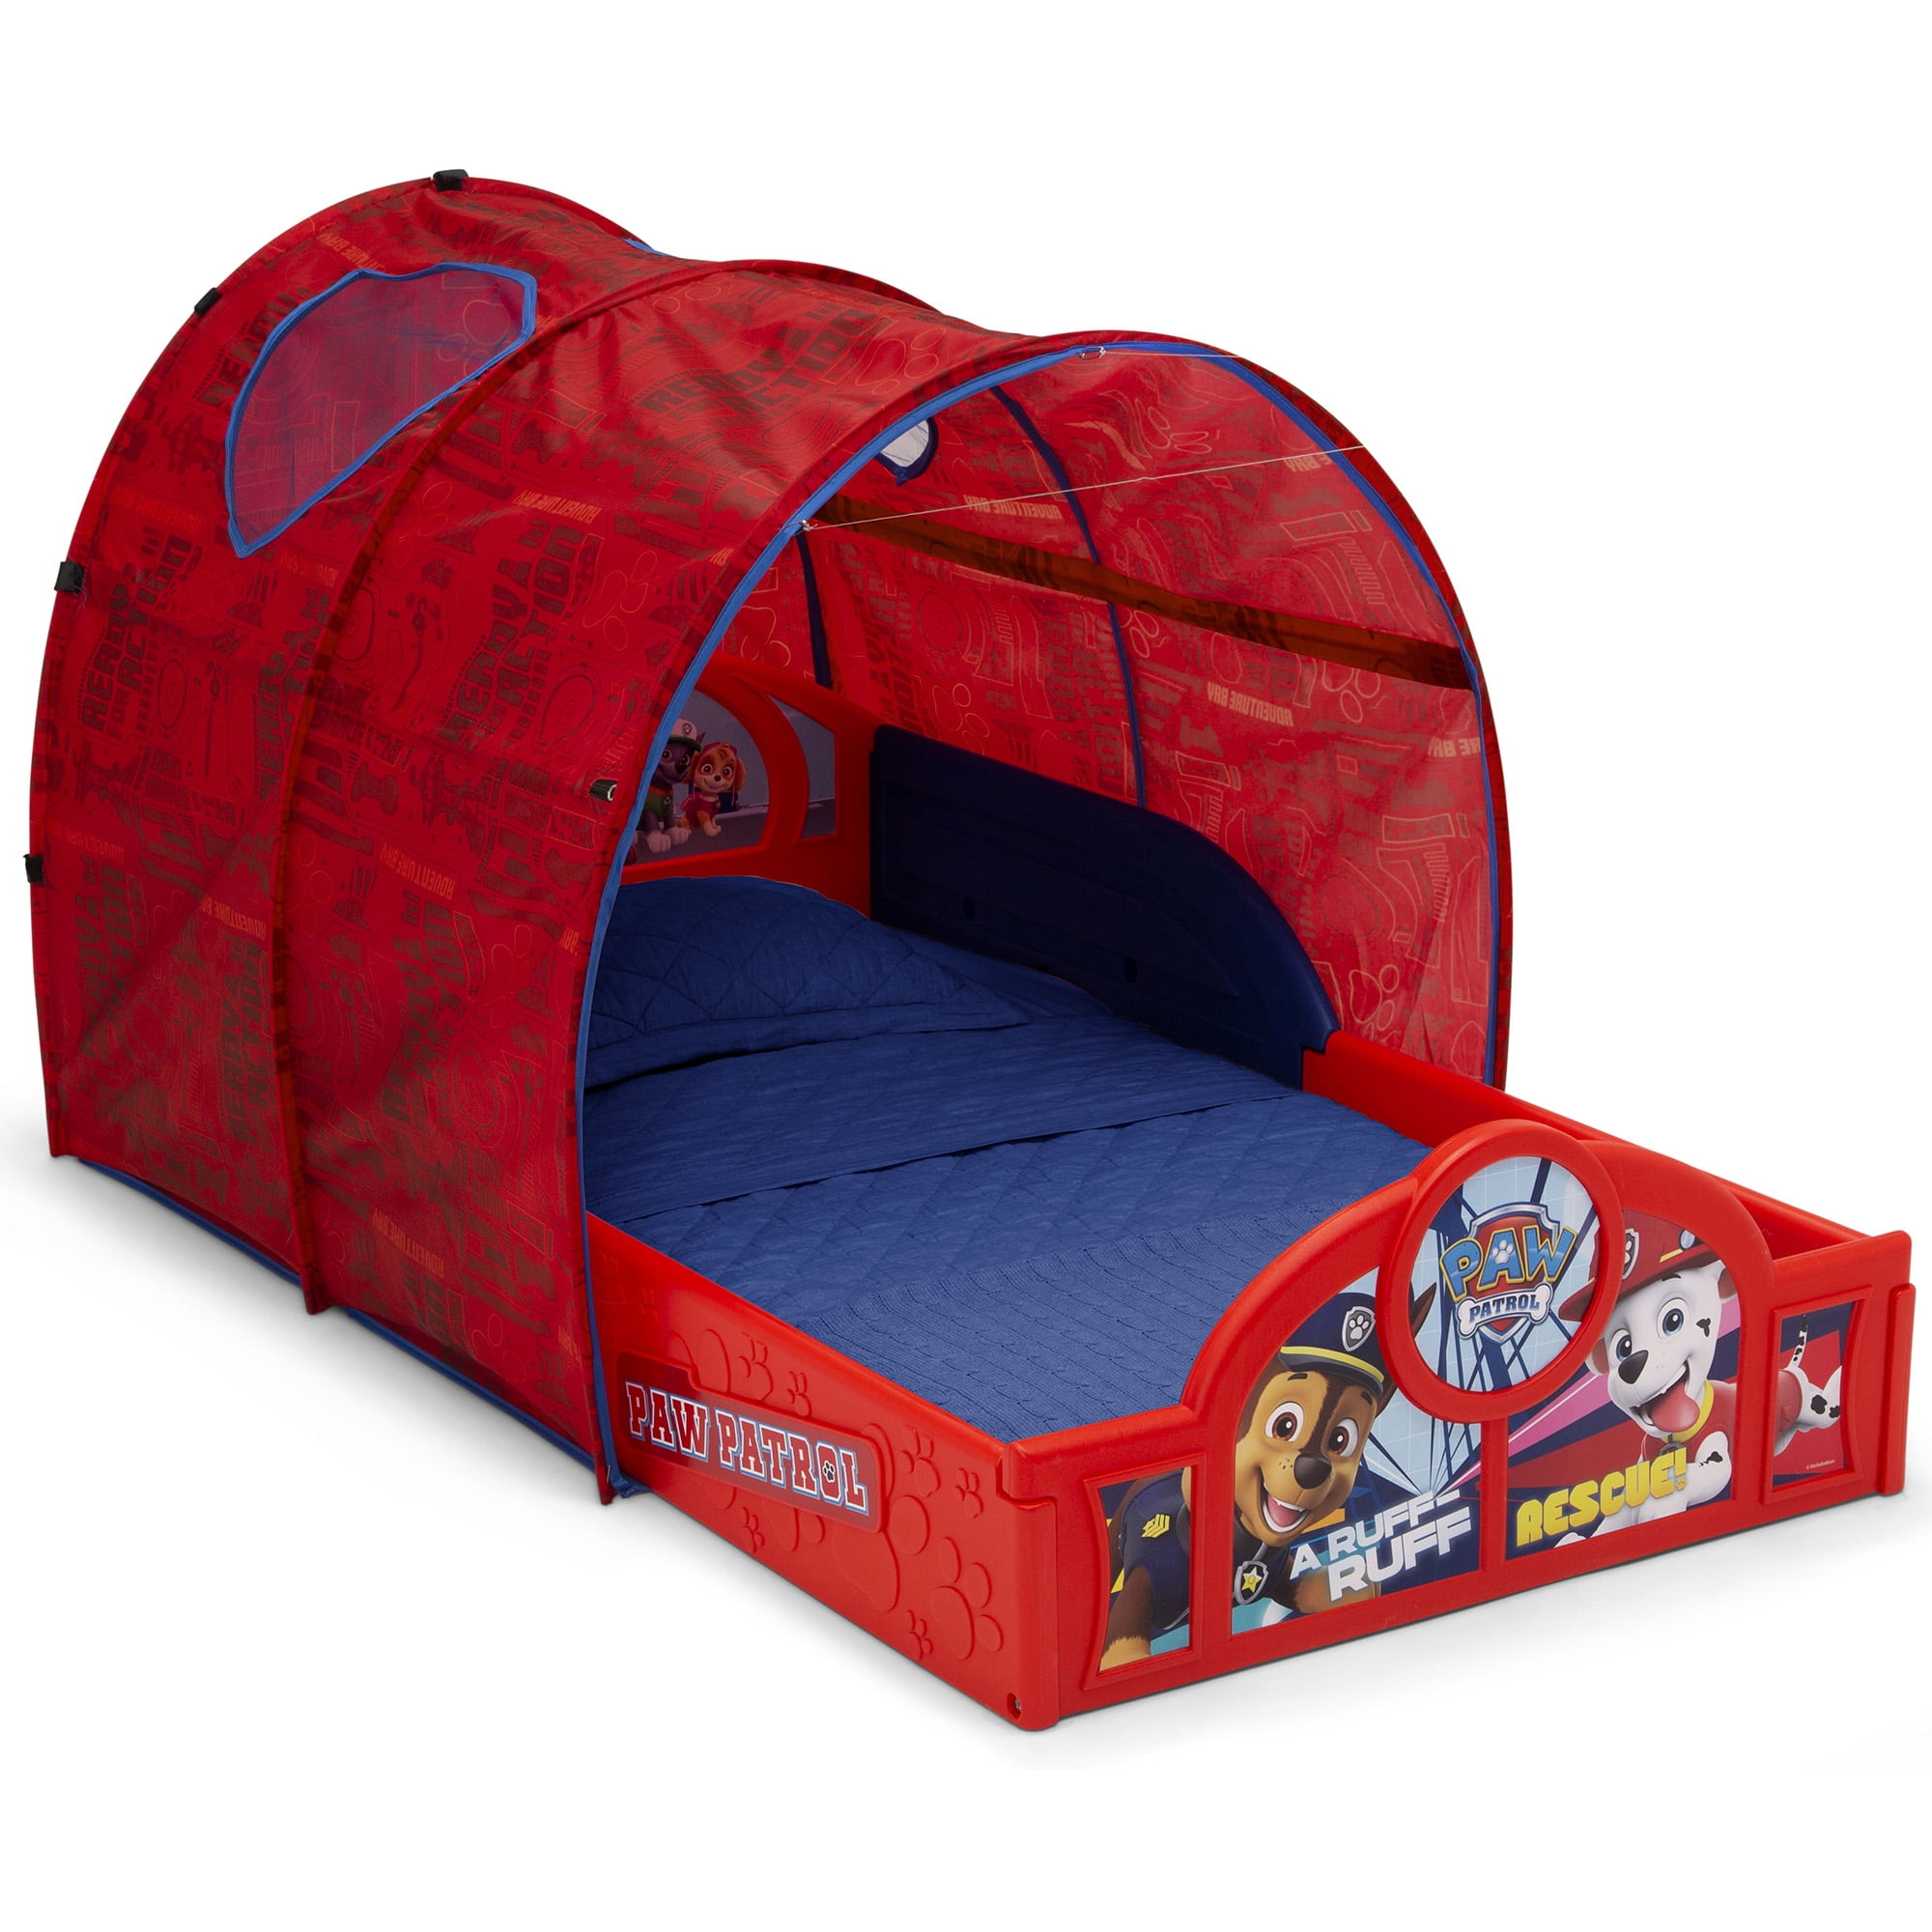 TODDLER BED WITH CANOPY BED TENT MULTIPLE CHOICE 